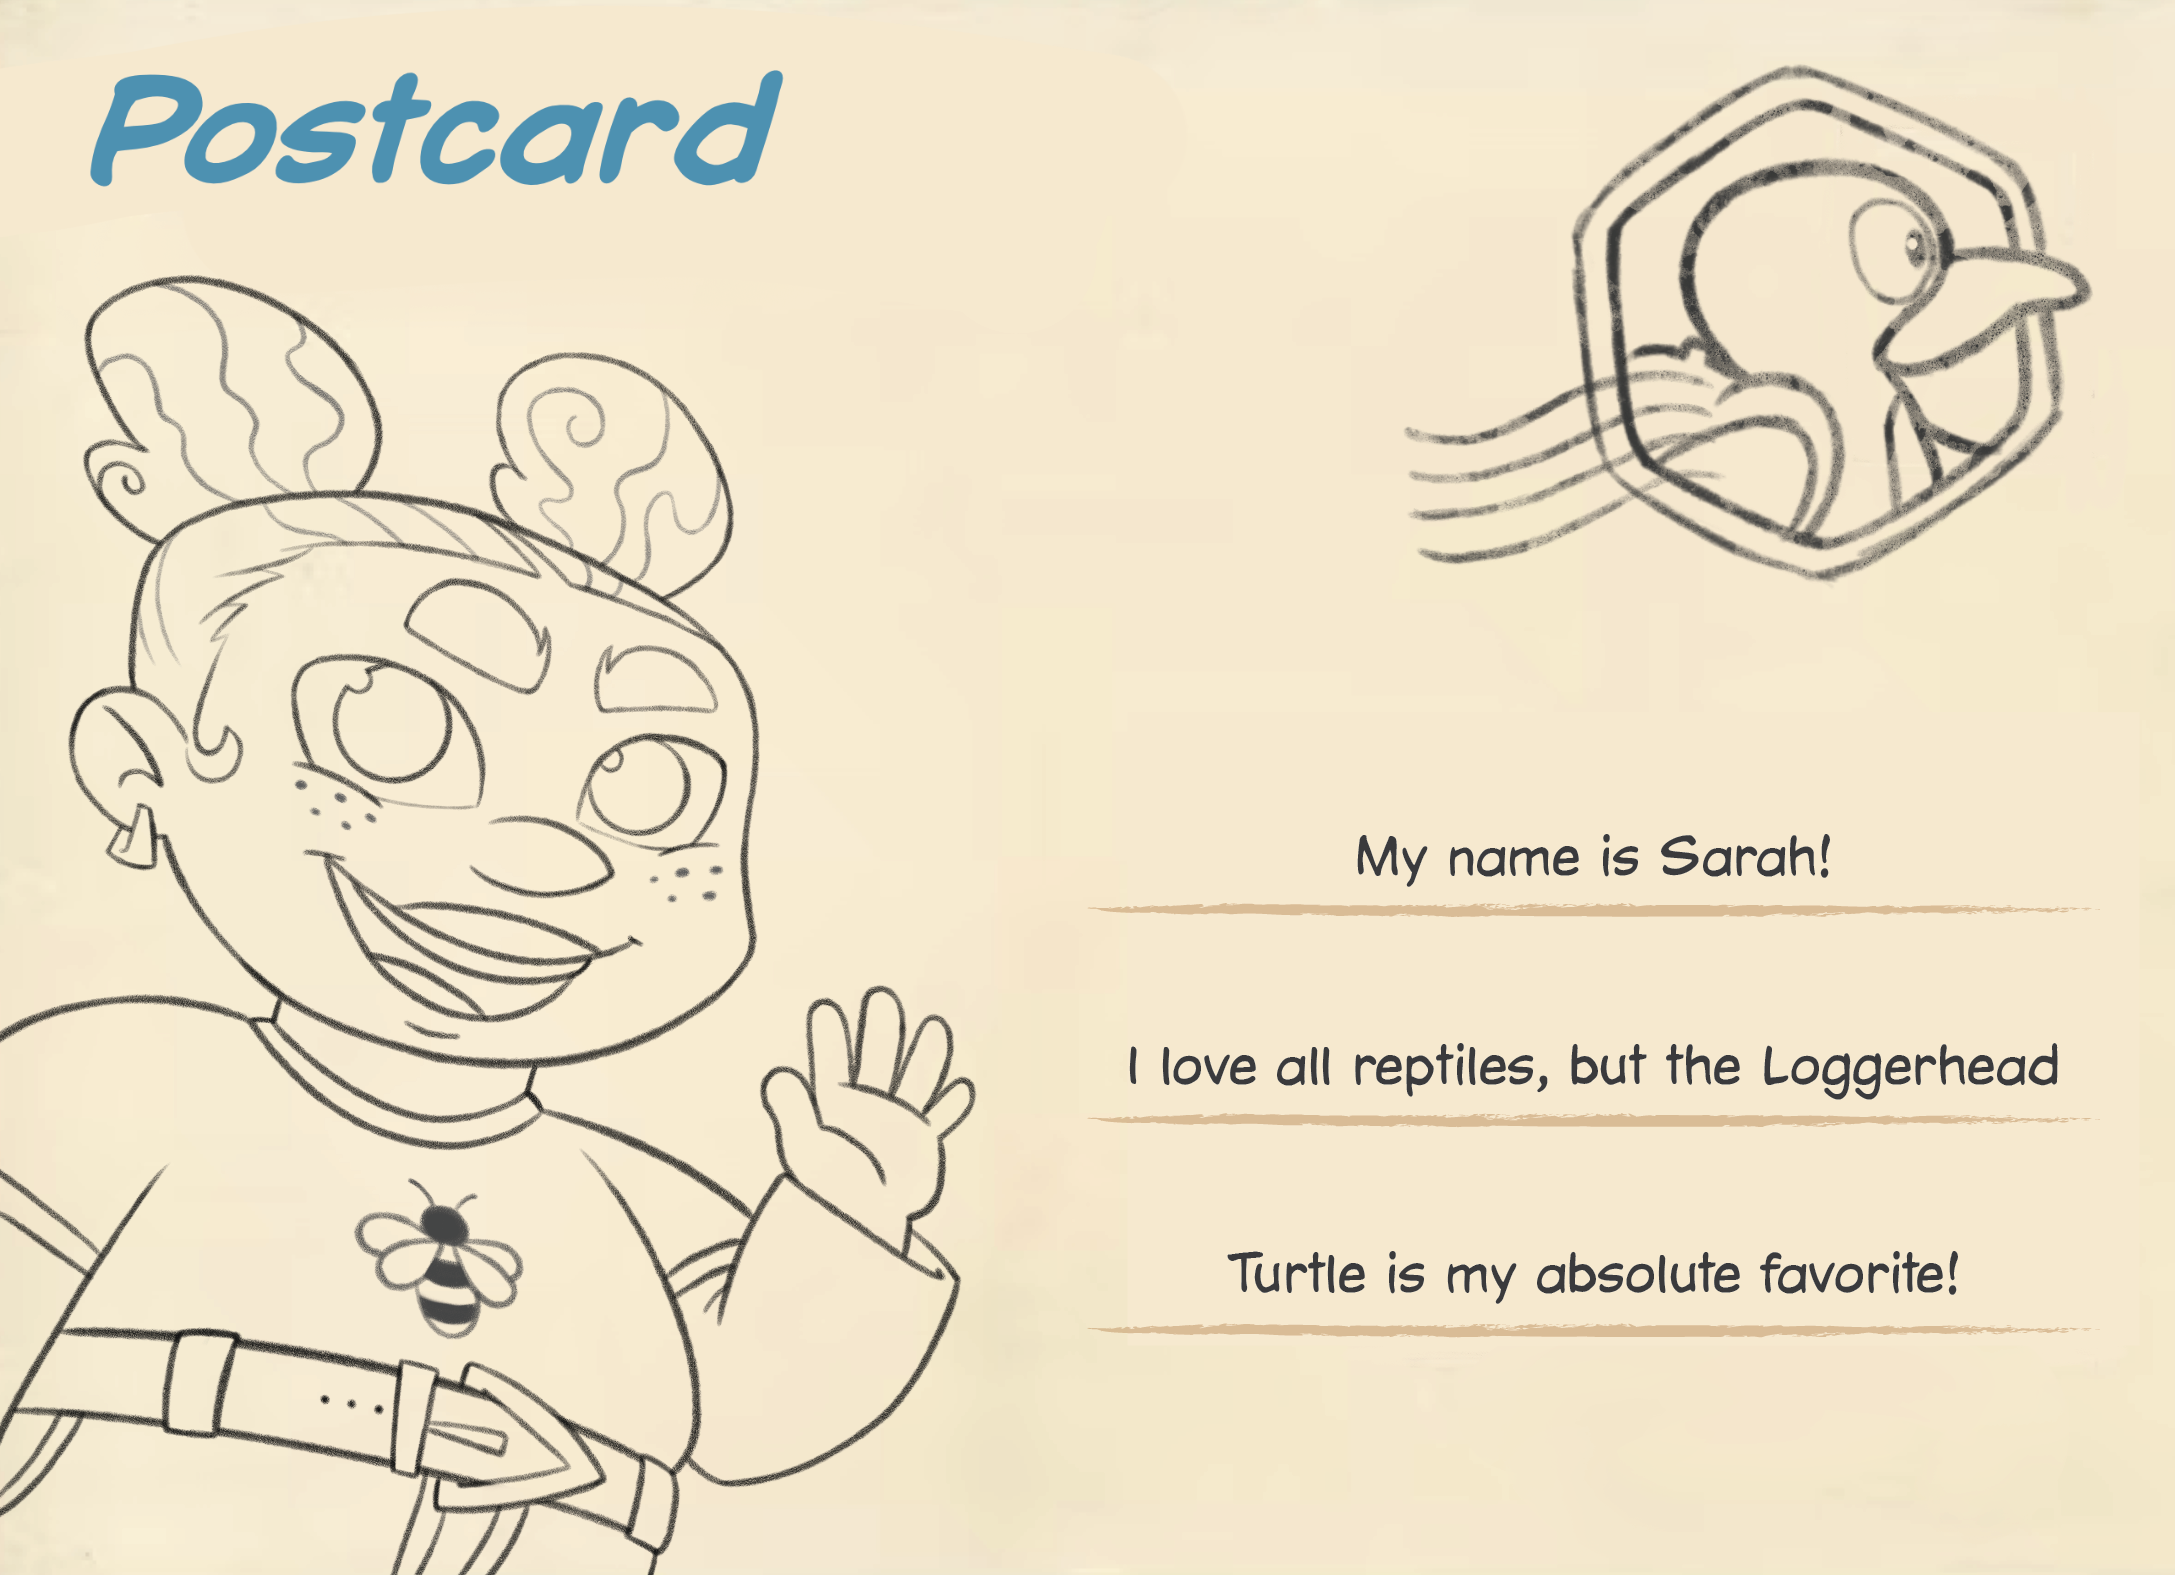 A postcard with My name is Sarah! I love all reptiles, but the Loggerhead Turtle is my absolute favorite! written on it